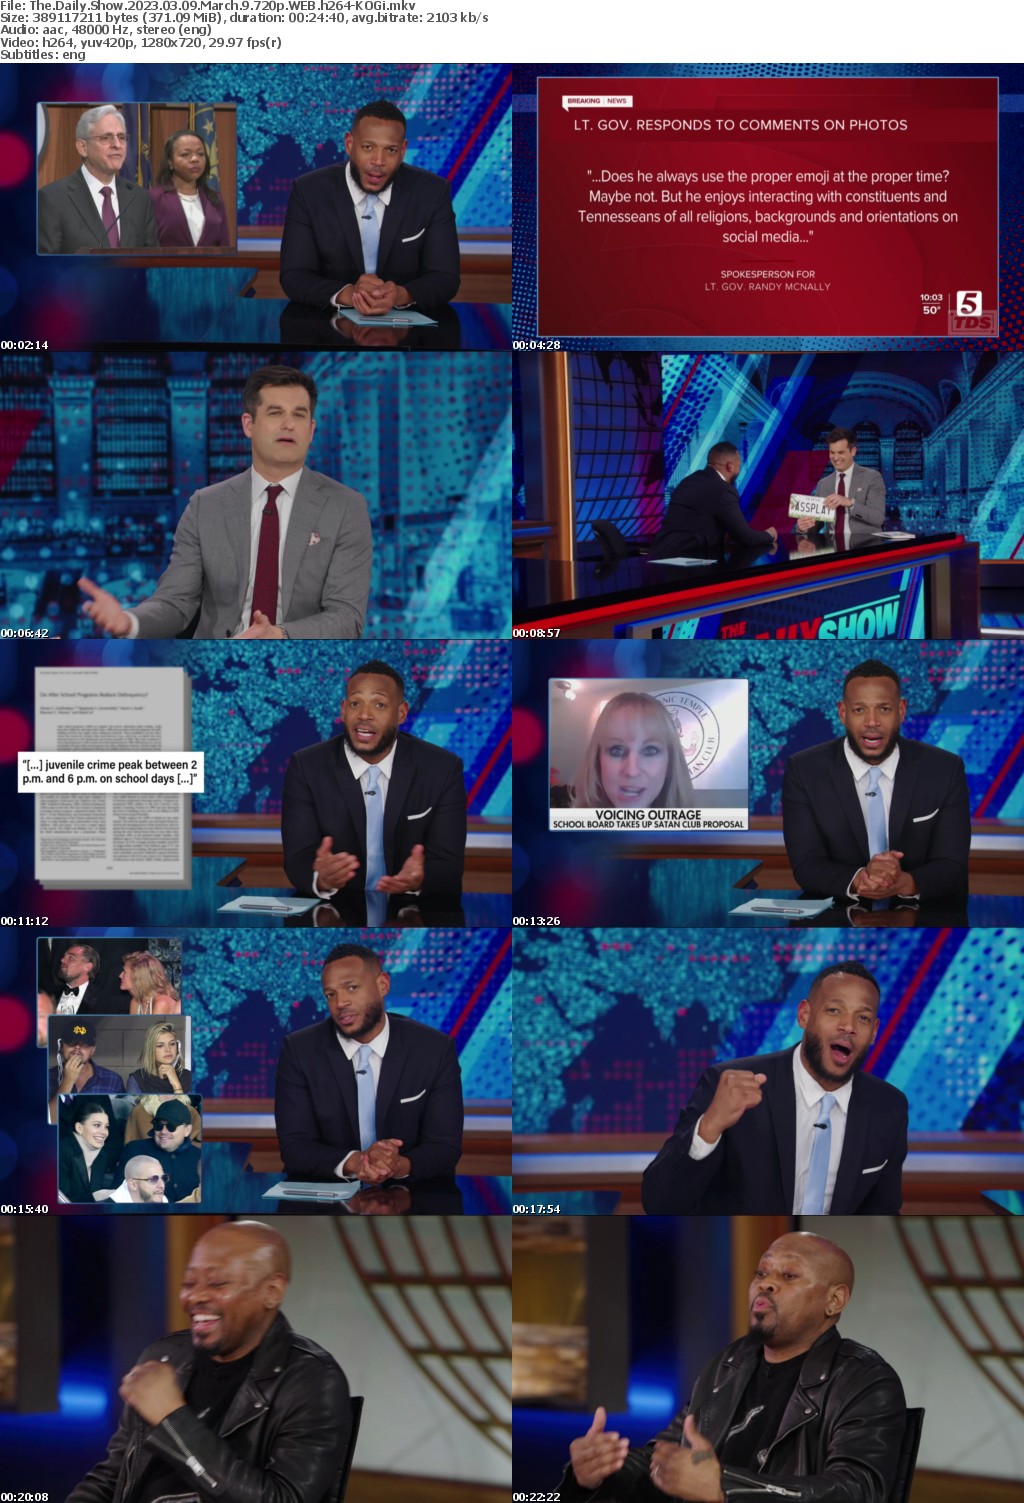 The Daily Show 2023 03 09 March 9 720p WEB h264-KOGi